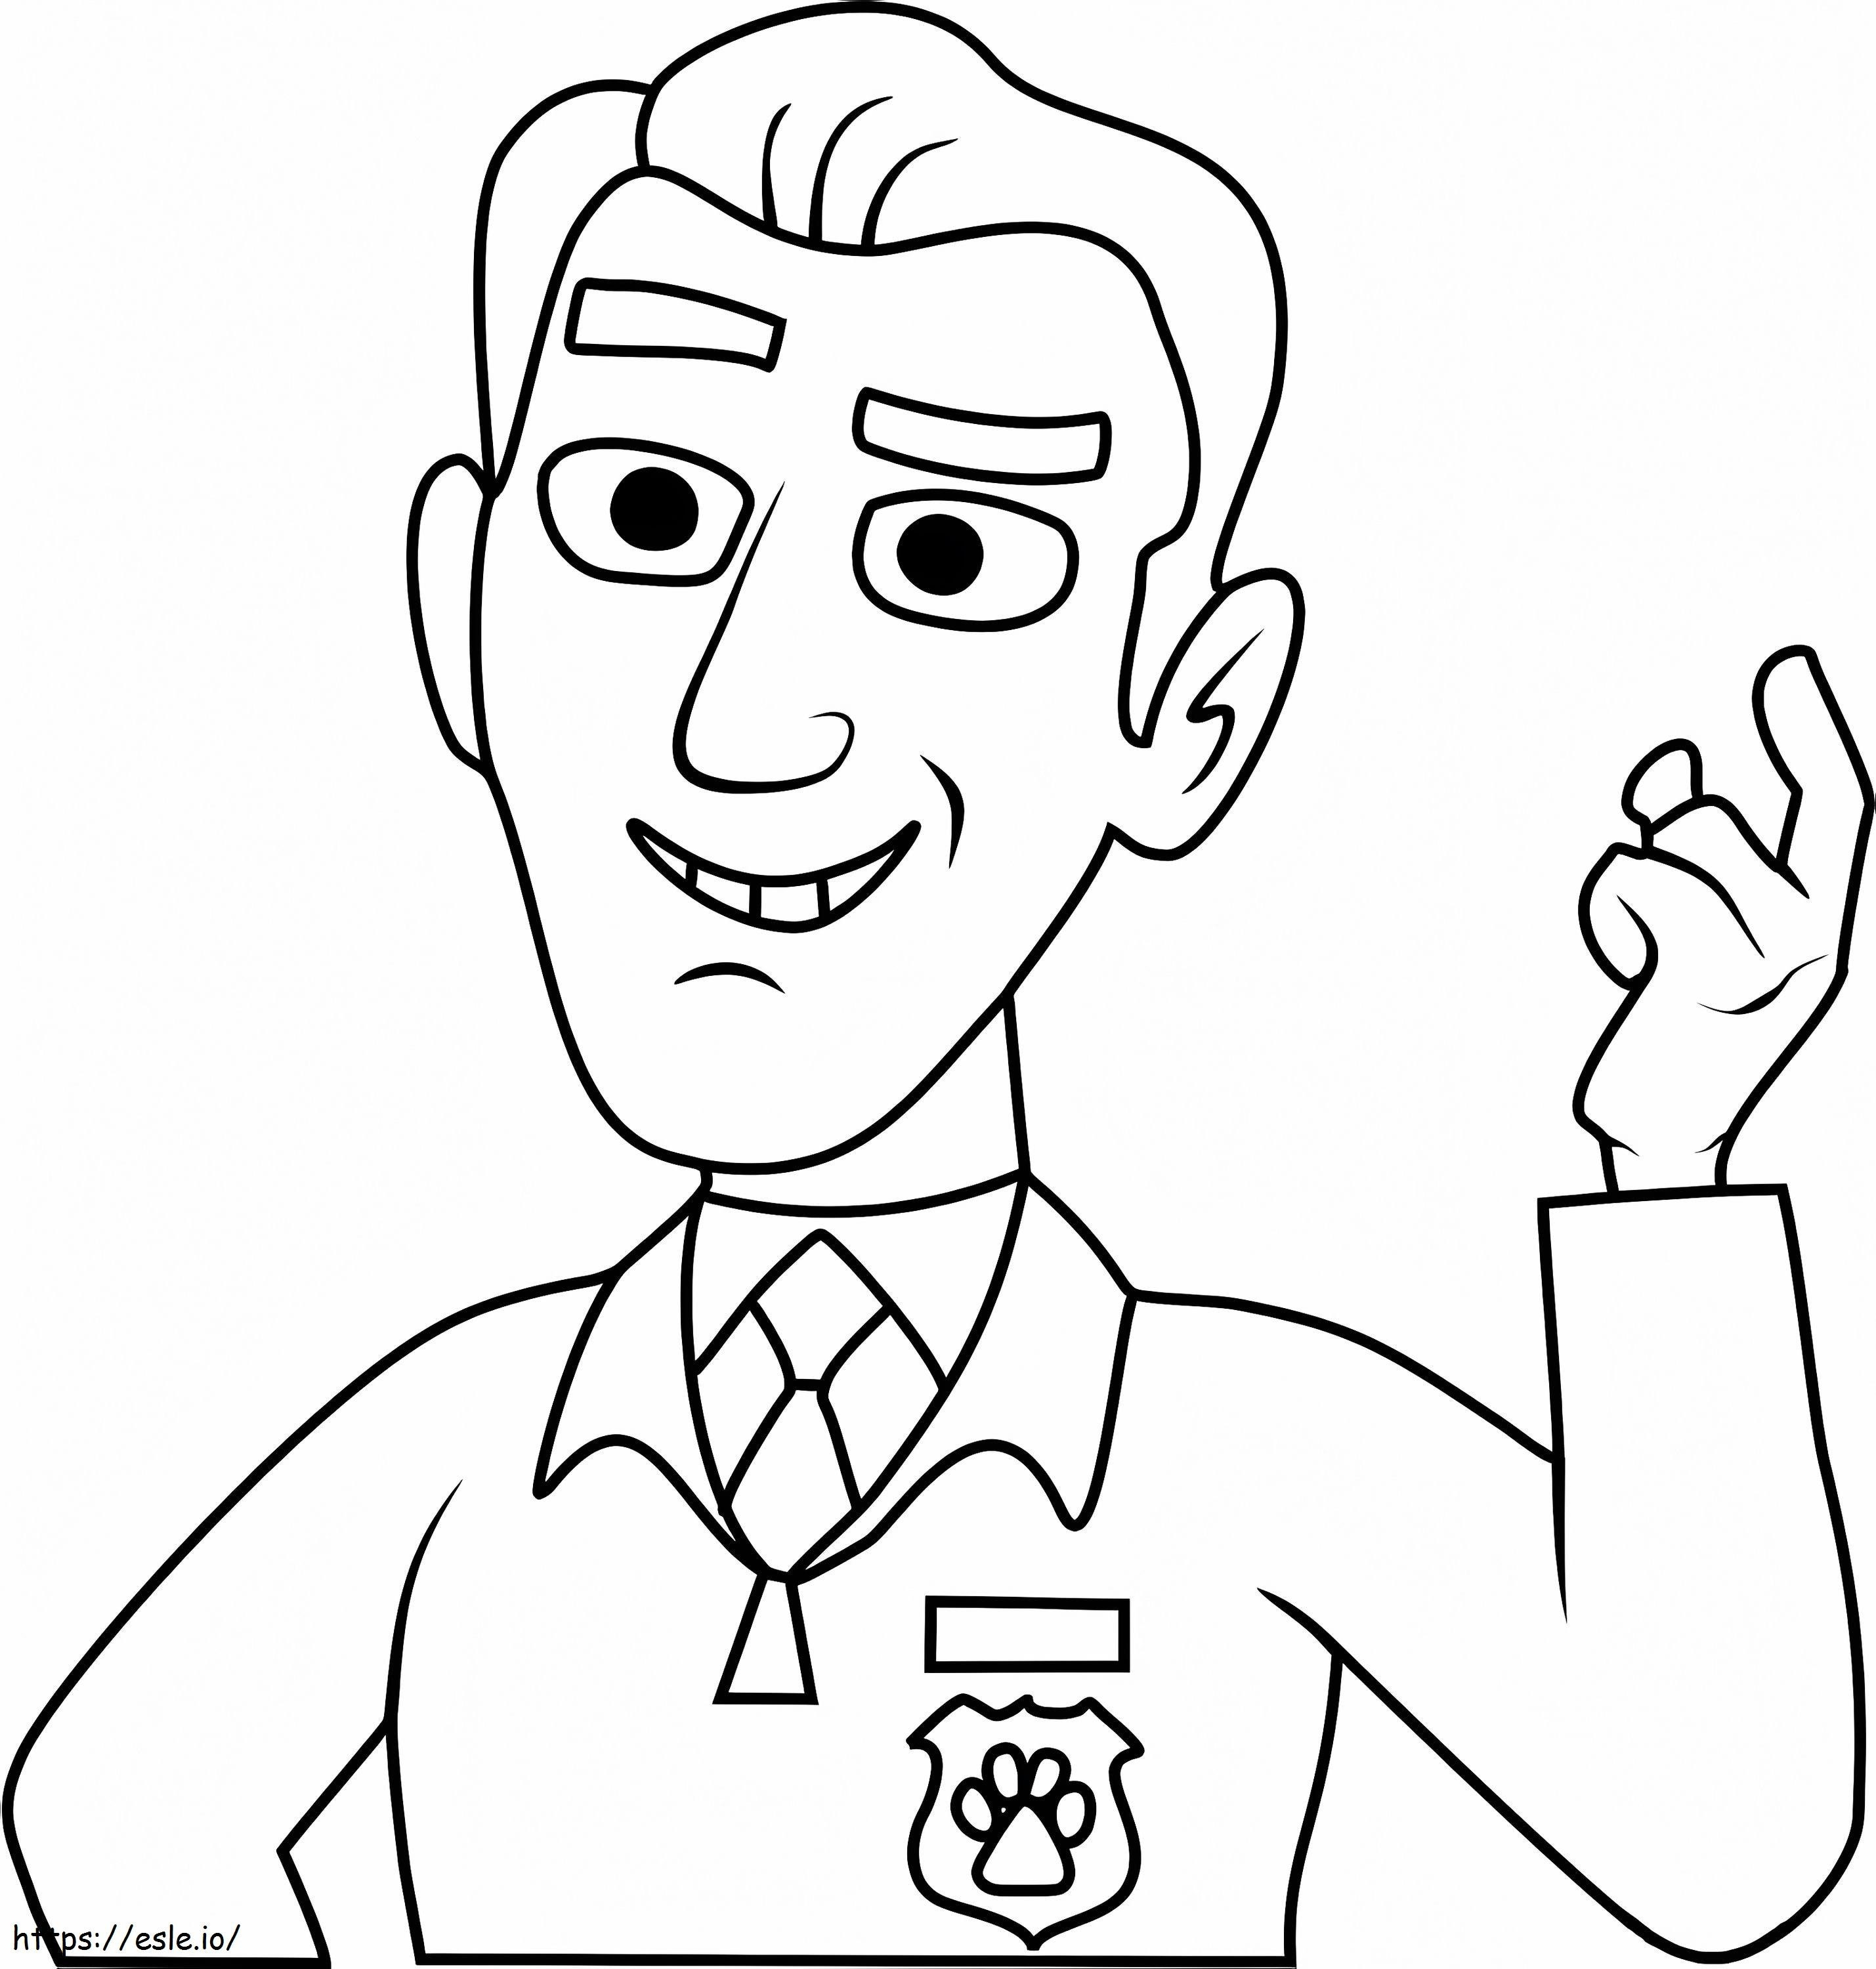 Robert Netter From Pound Puppies coloring page